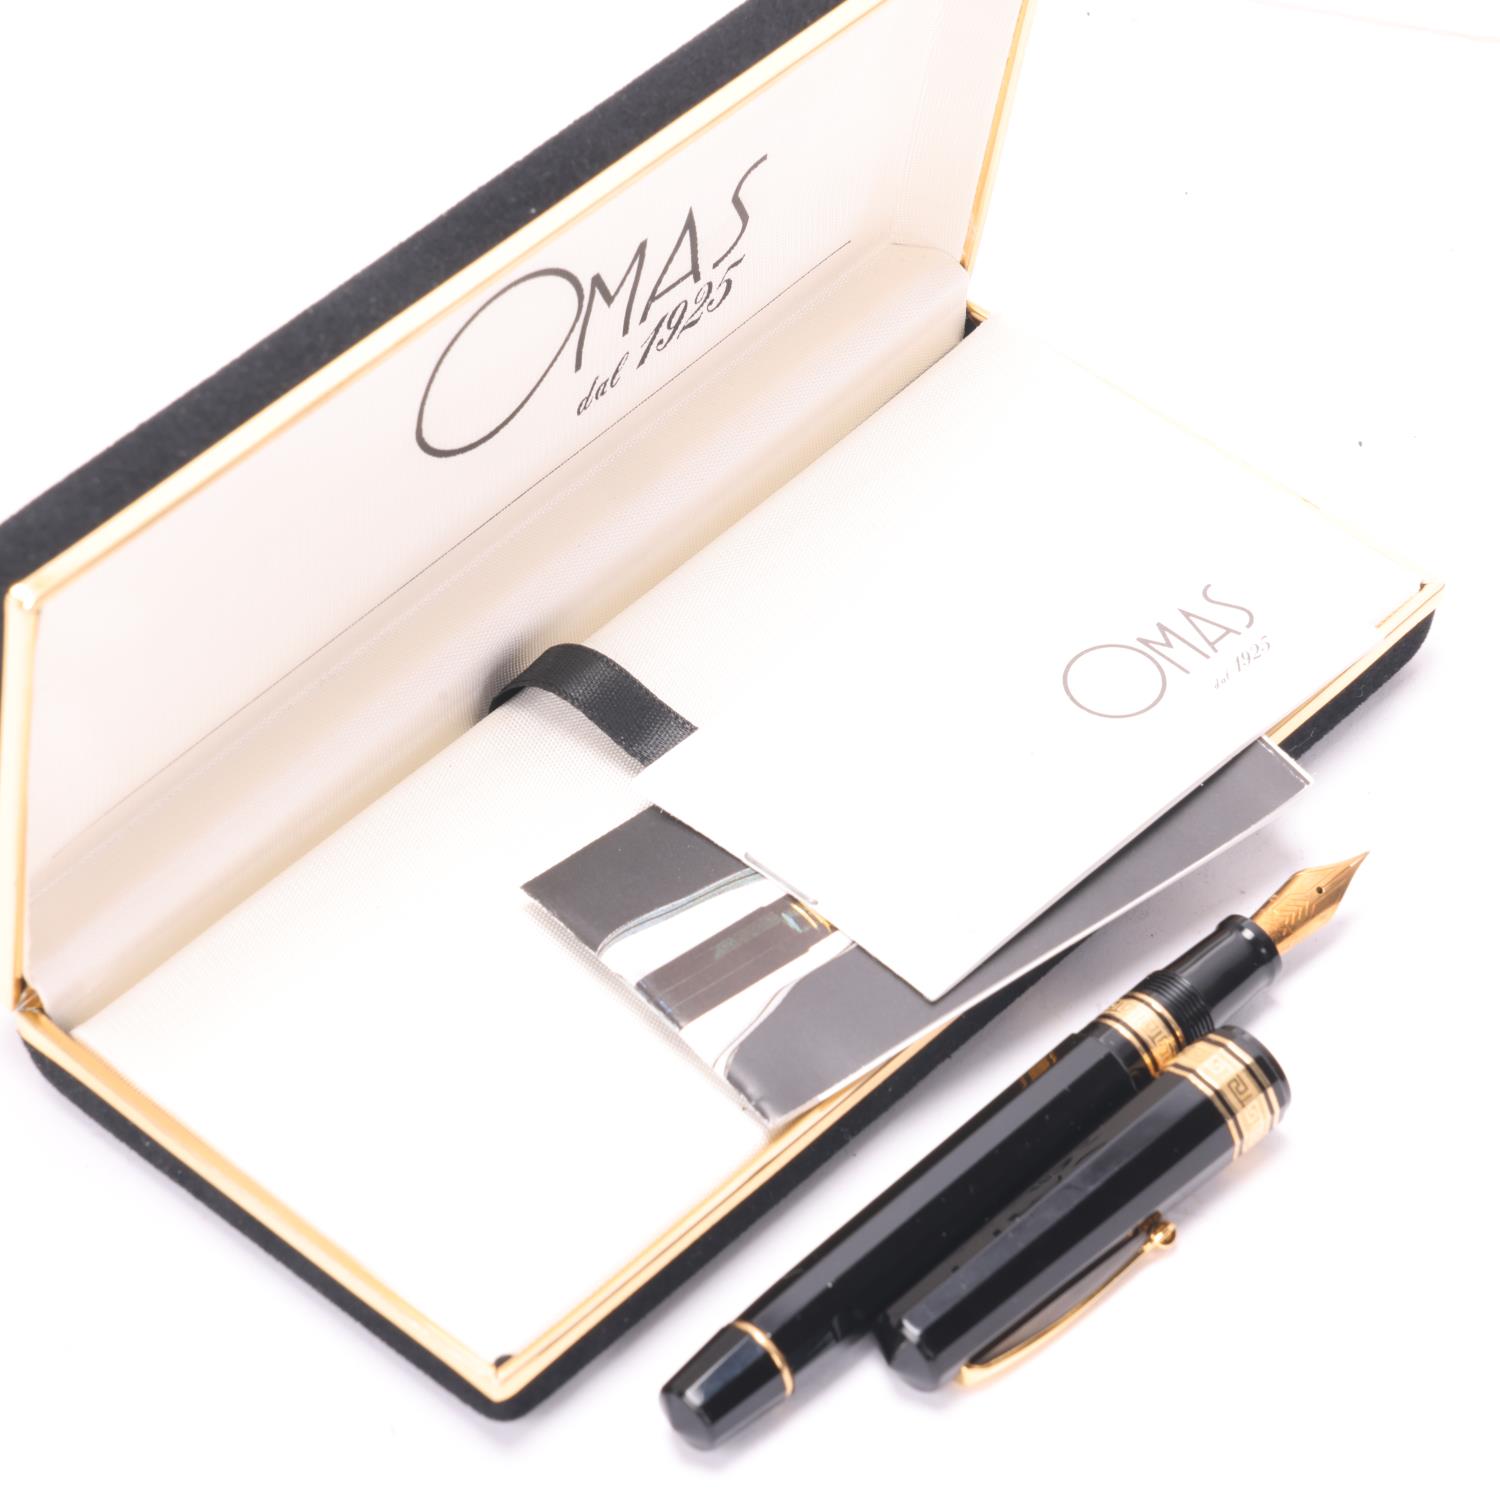 An Omas Dama fountain pen, with 14ct EF nib and black resin piston fill body, boxed with papers Very - Image 3 of 4